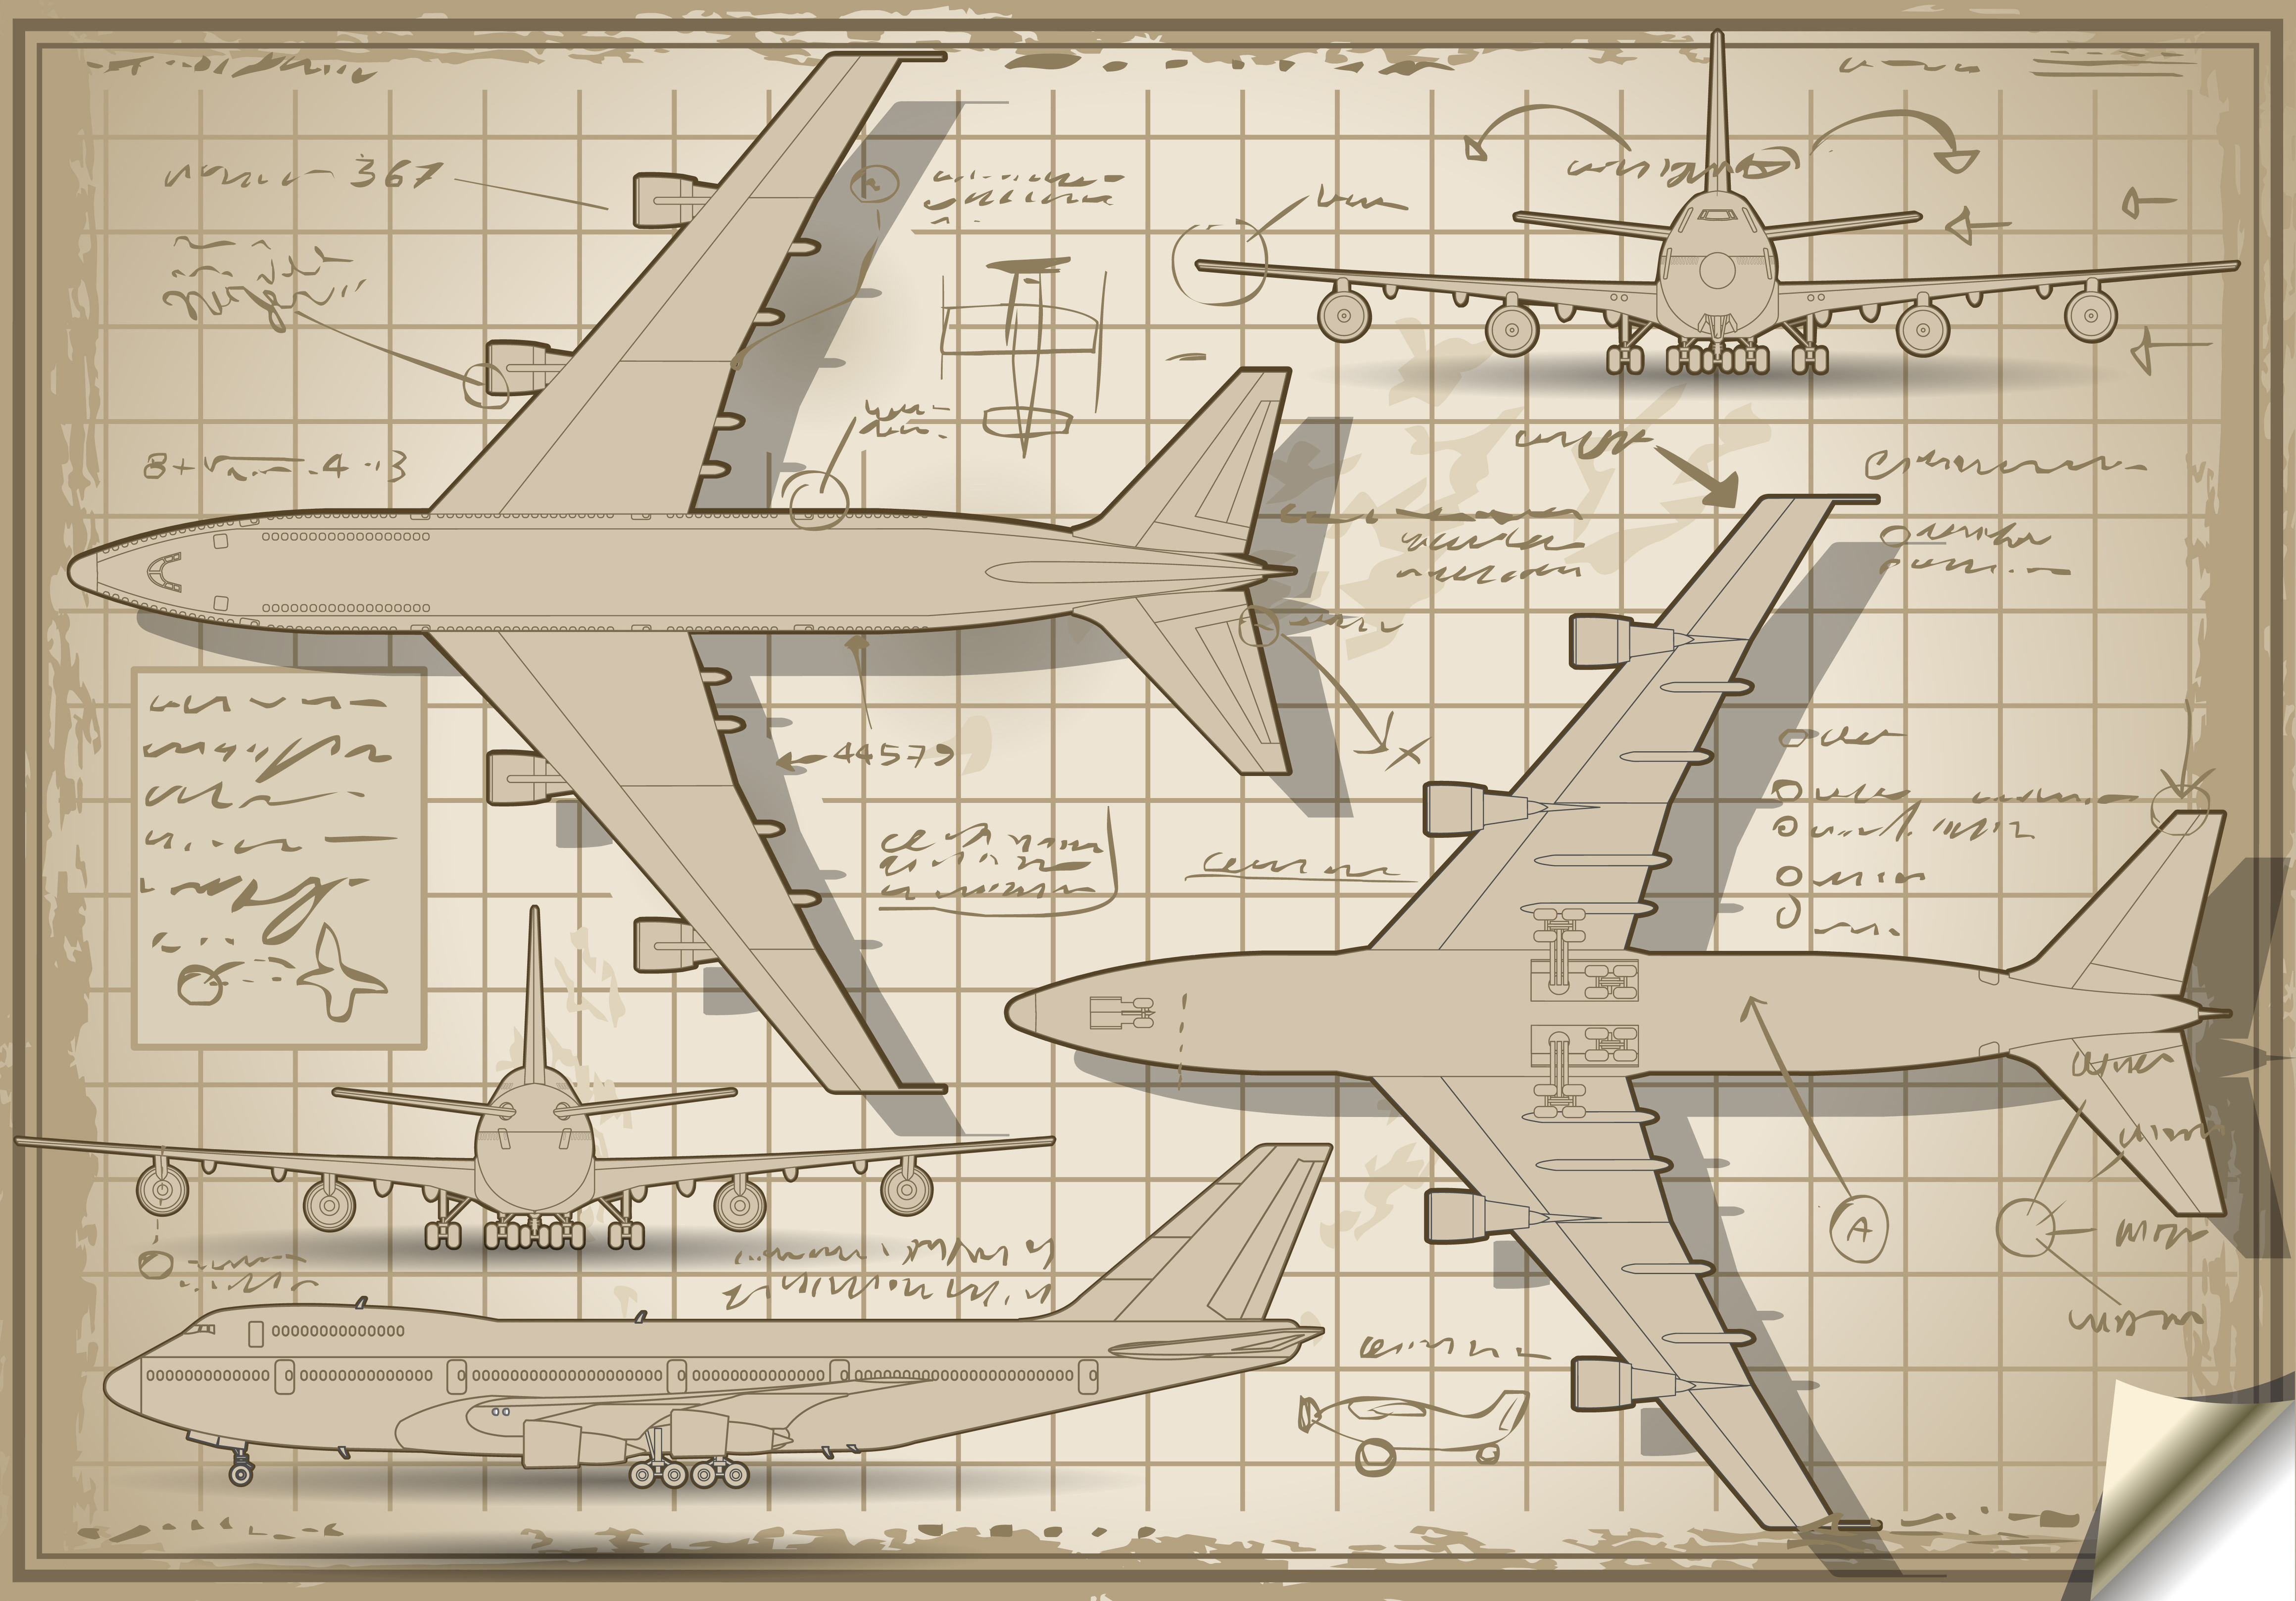 Framed photos of plane diagrams brought back meaning and purpose